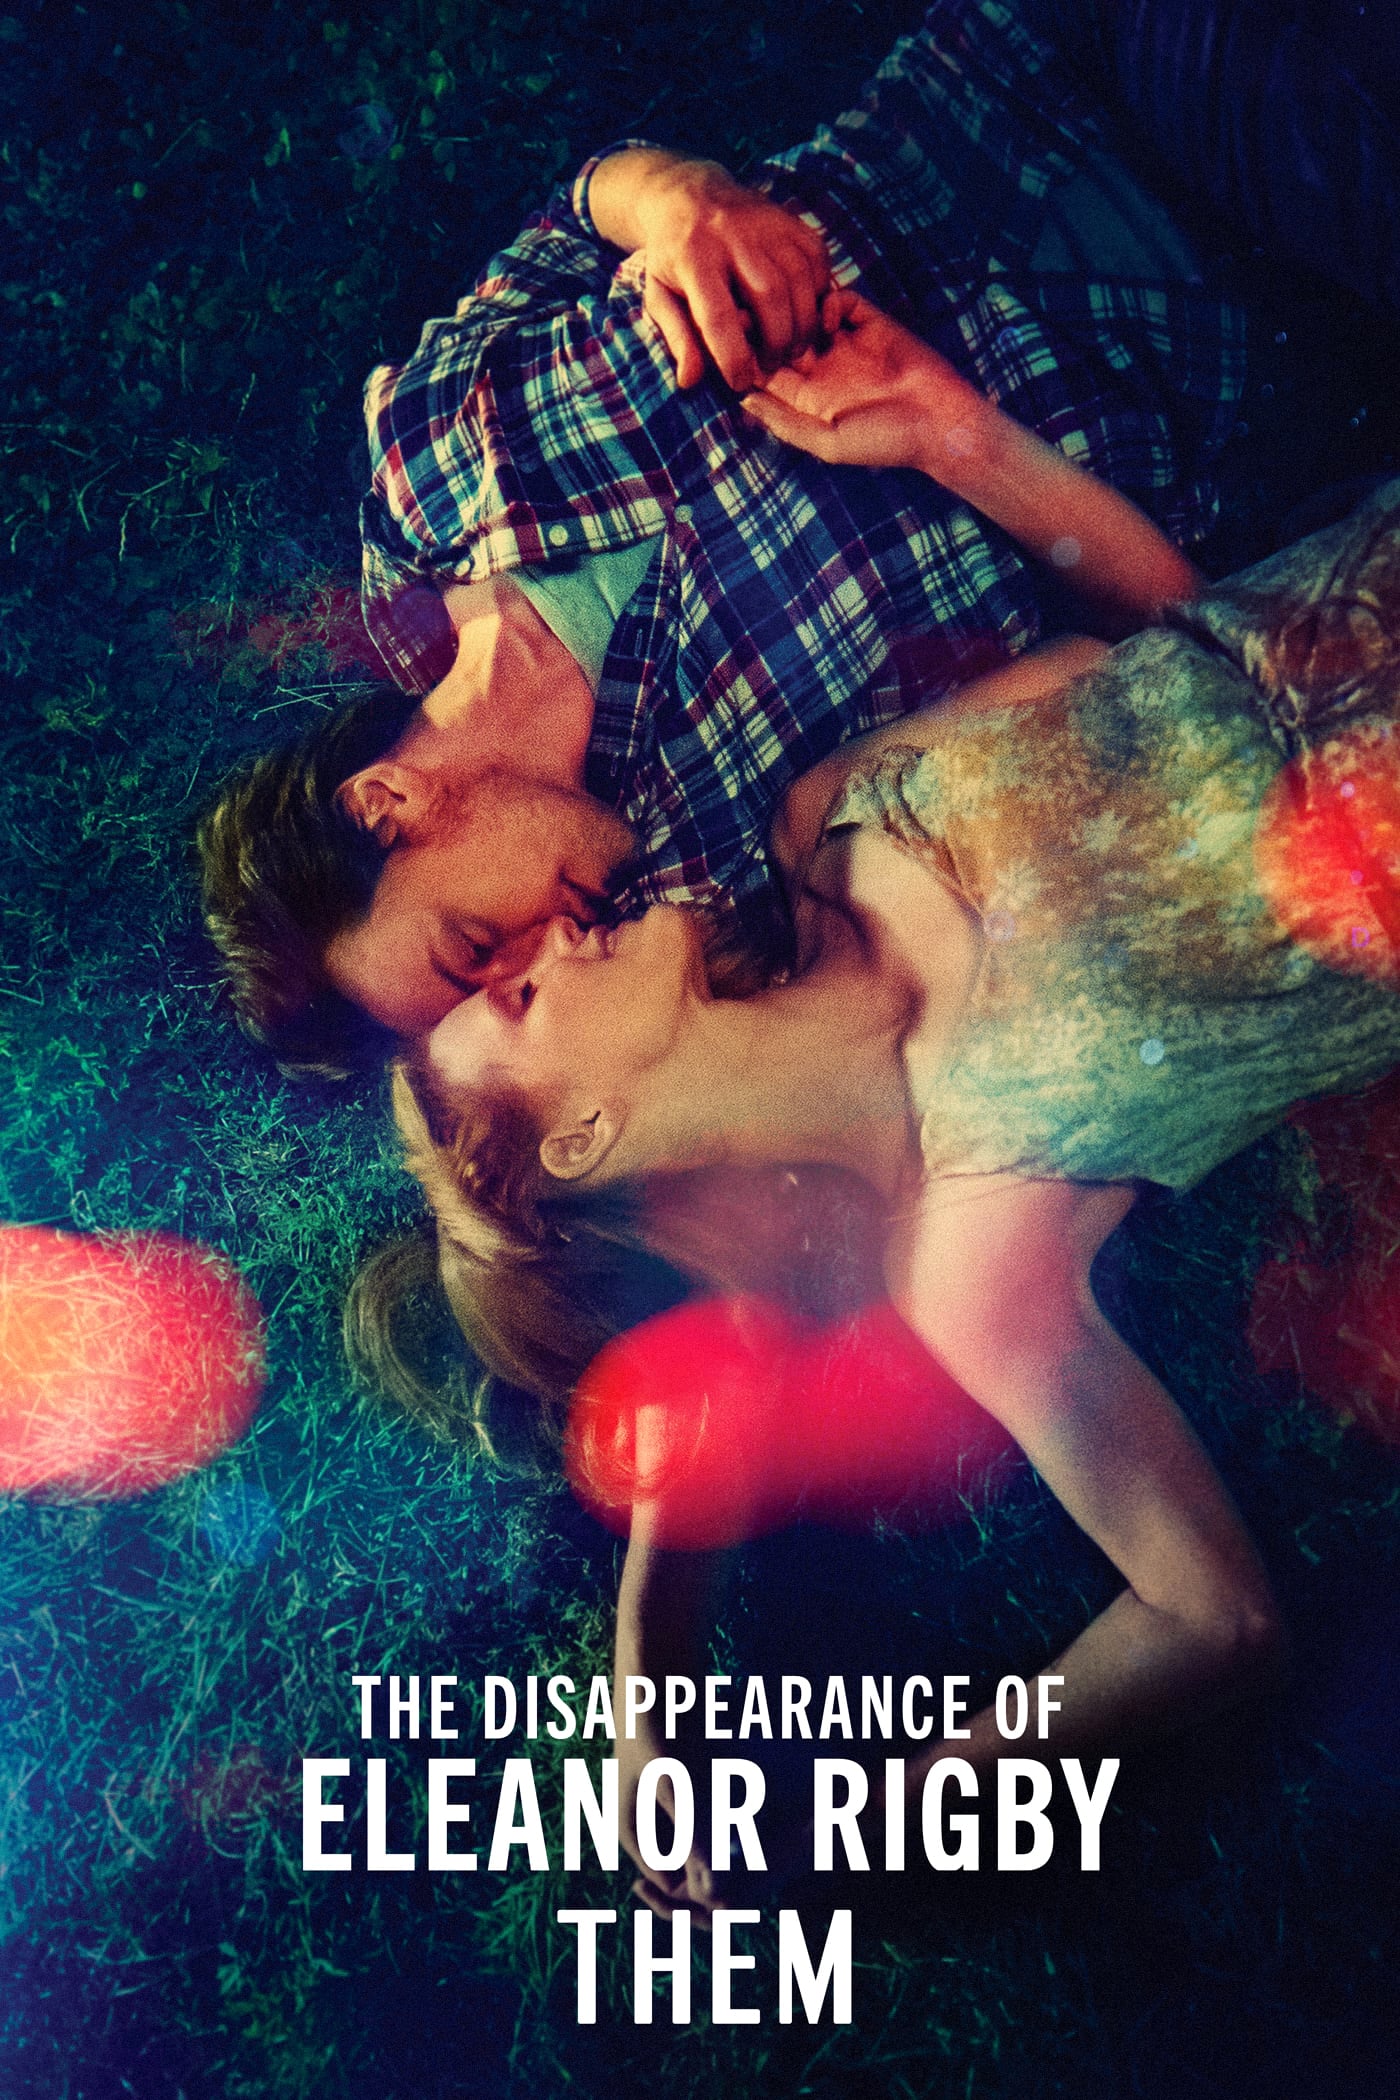 THE DISAPPEARANCE OF ELEANOR RIGBY: THEM